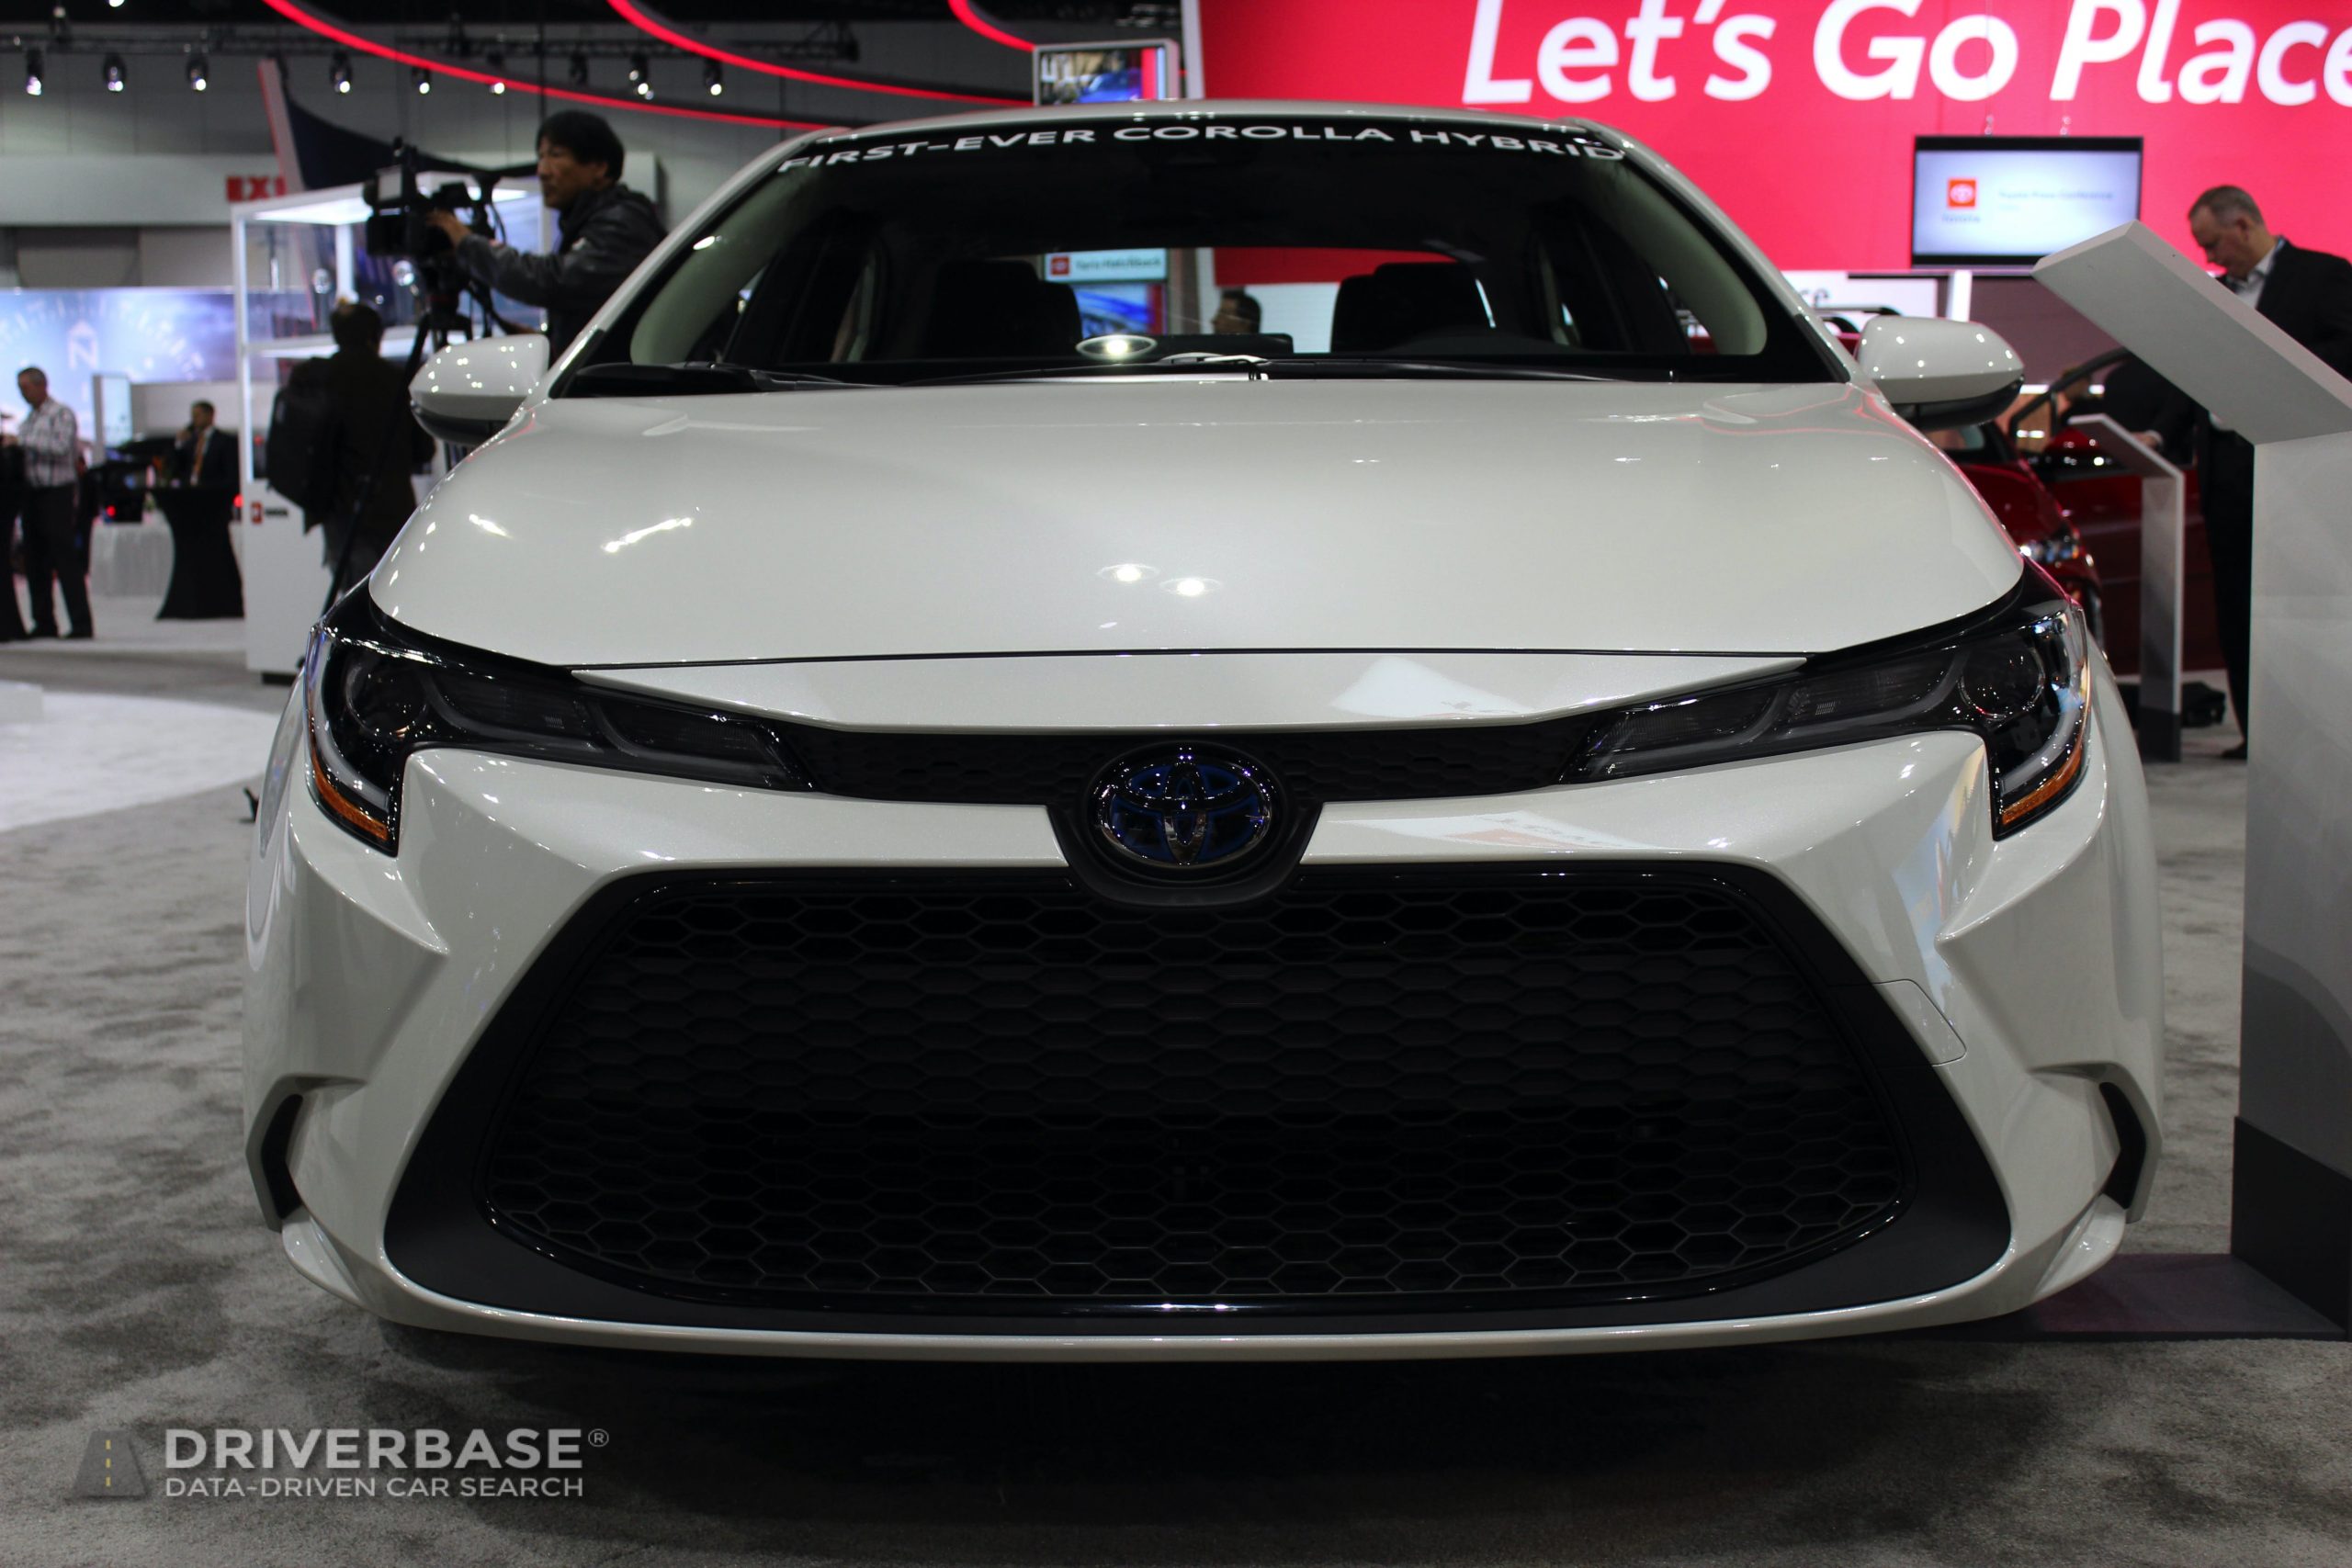 2020 Toyota Corolla Hybrid at the 2019 Los Angeles Auto Show